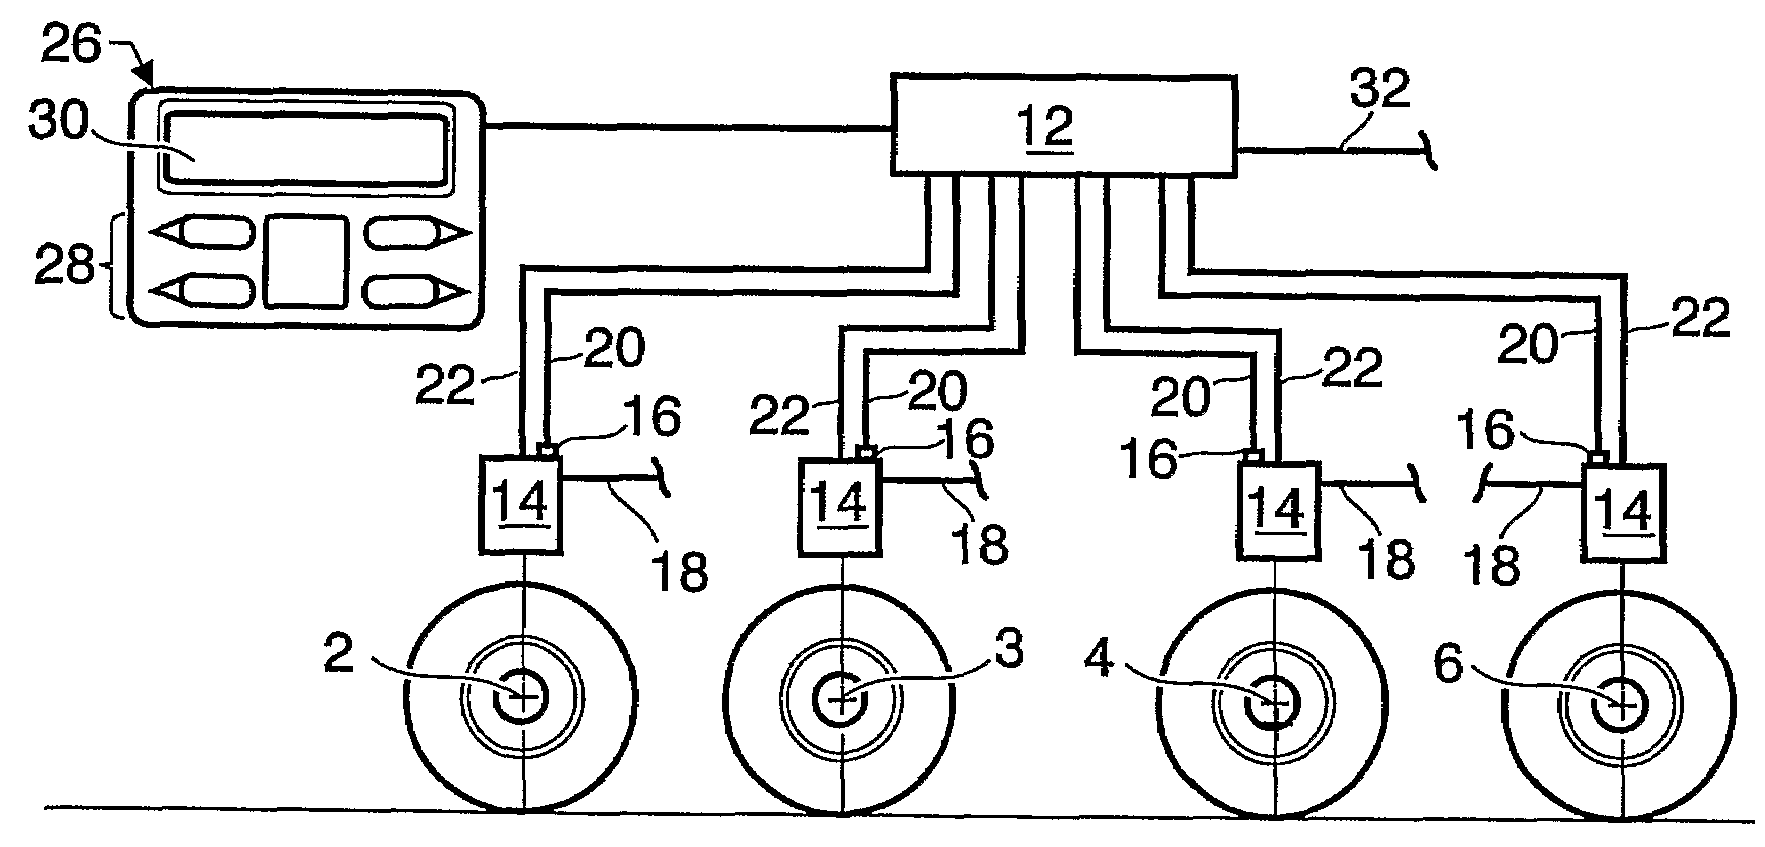 System and Method for Controlling the Axle Load Split Ratio on a Vehicle With Two Front Axles